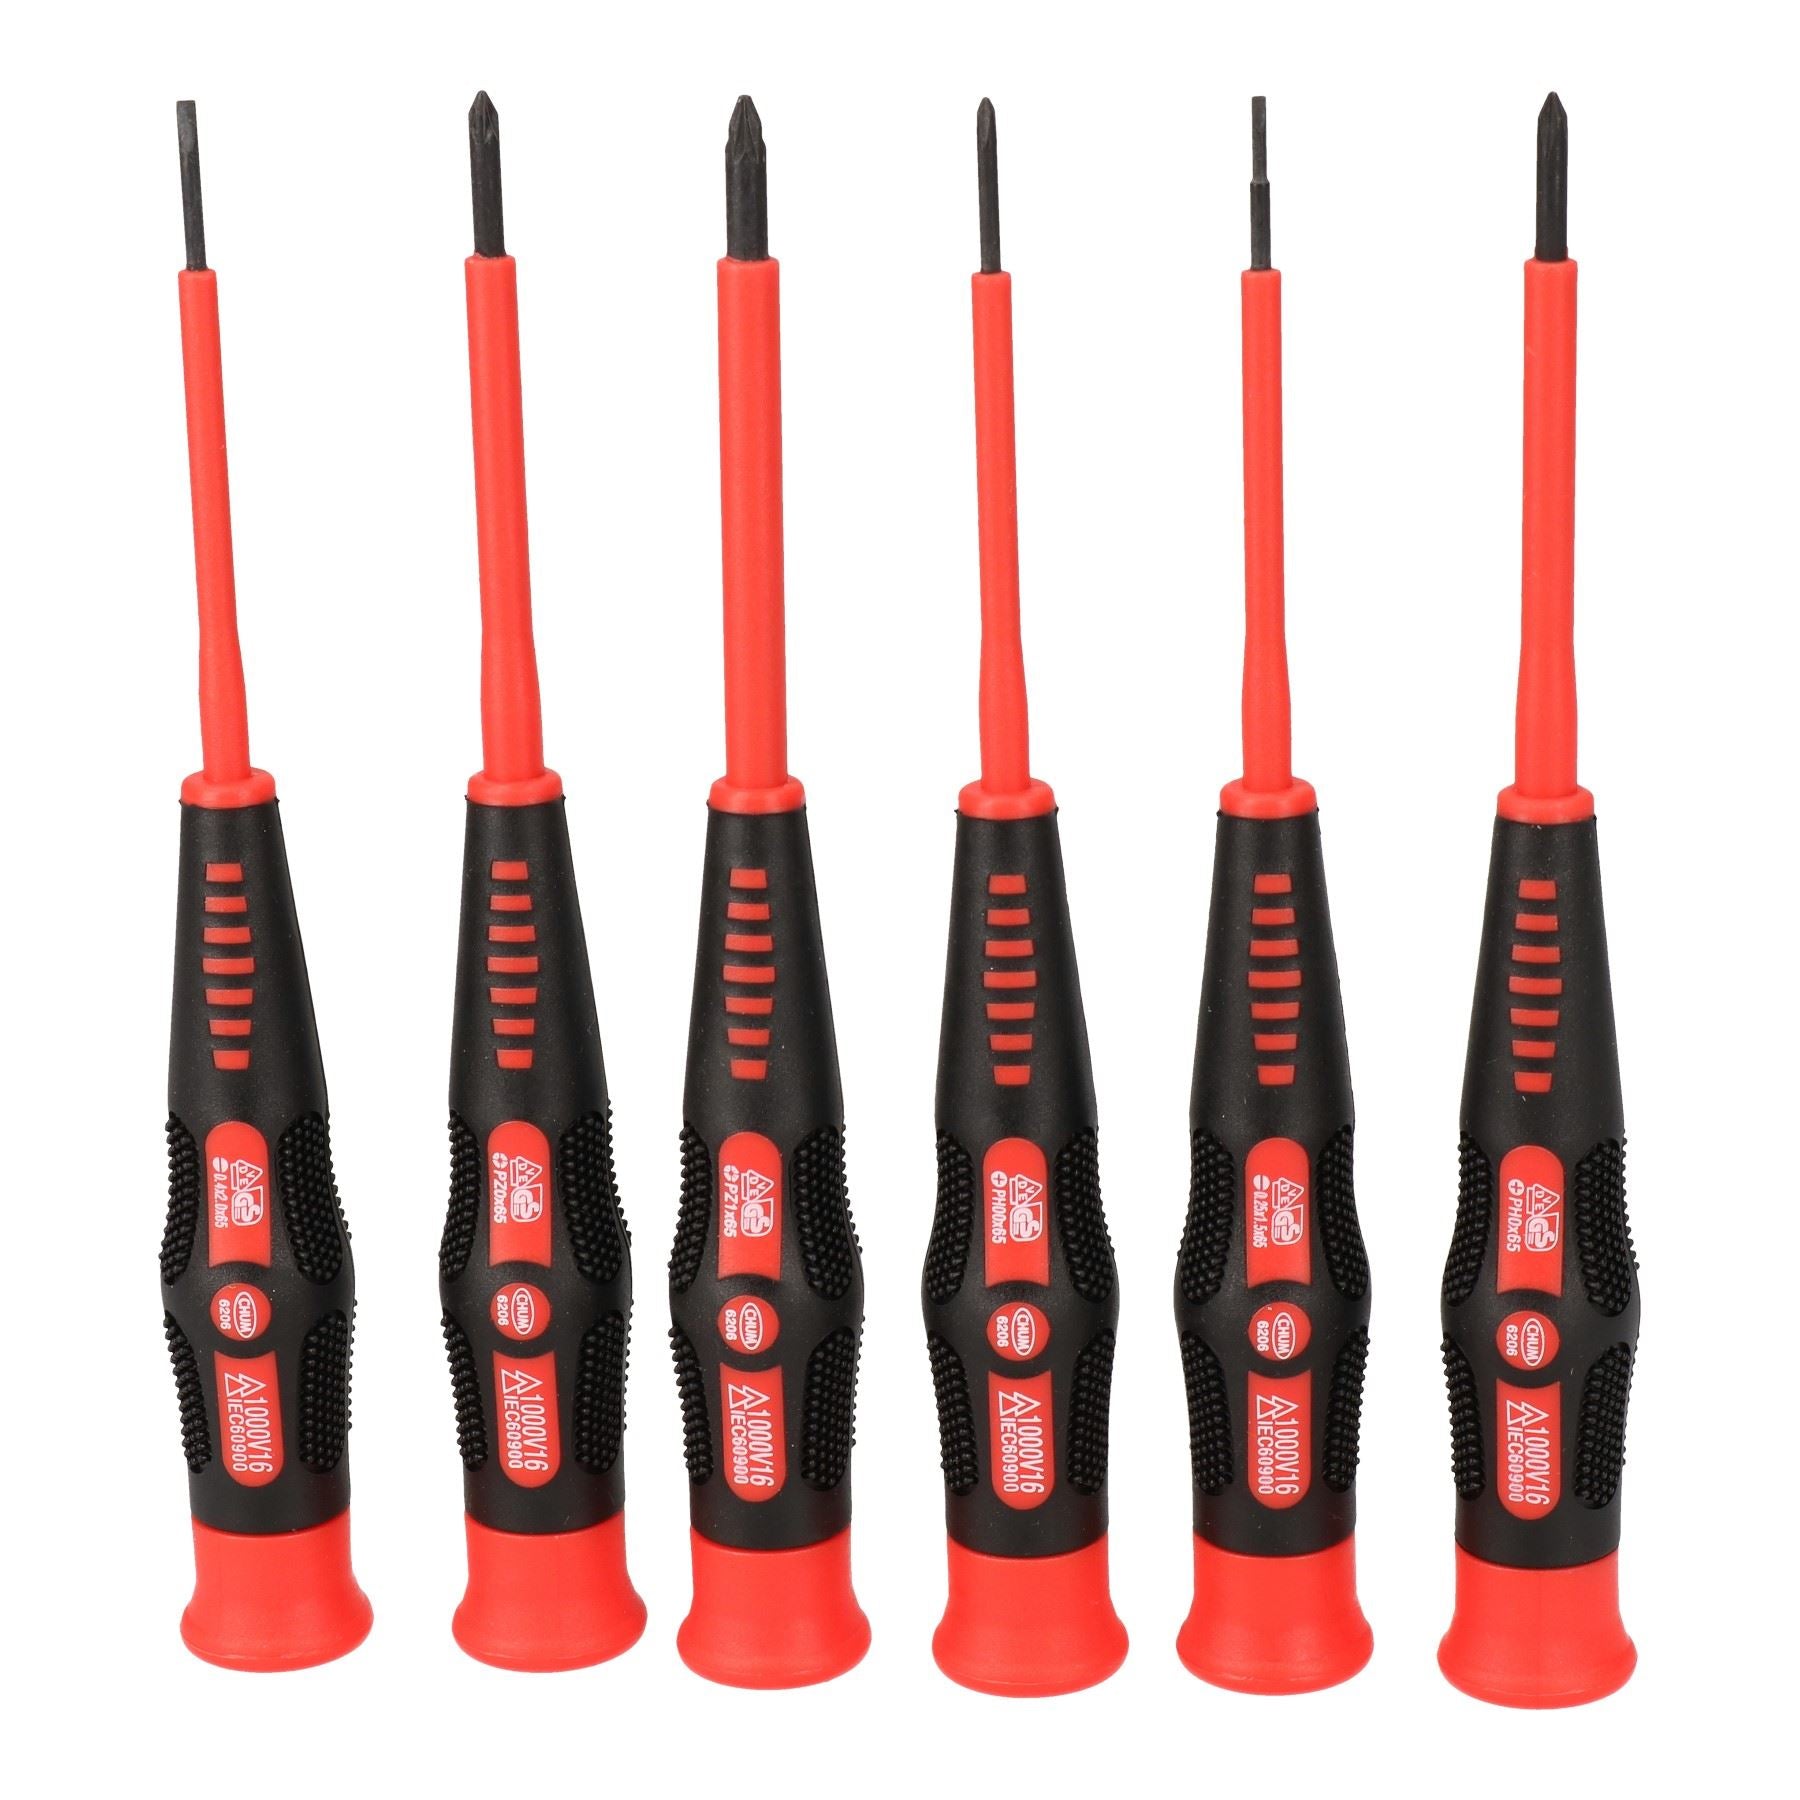 Electricians VDE Insulated Precision Screwdriver Pozi Phillips and Slotted 6pc